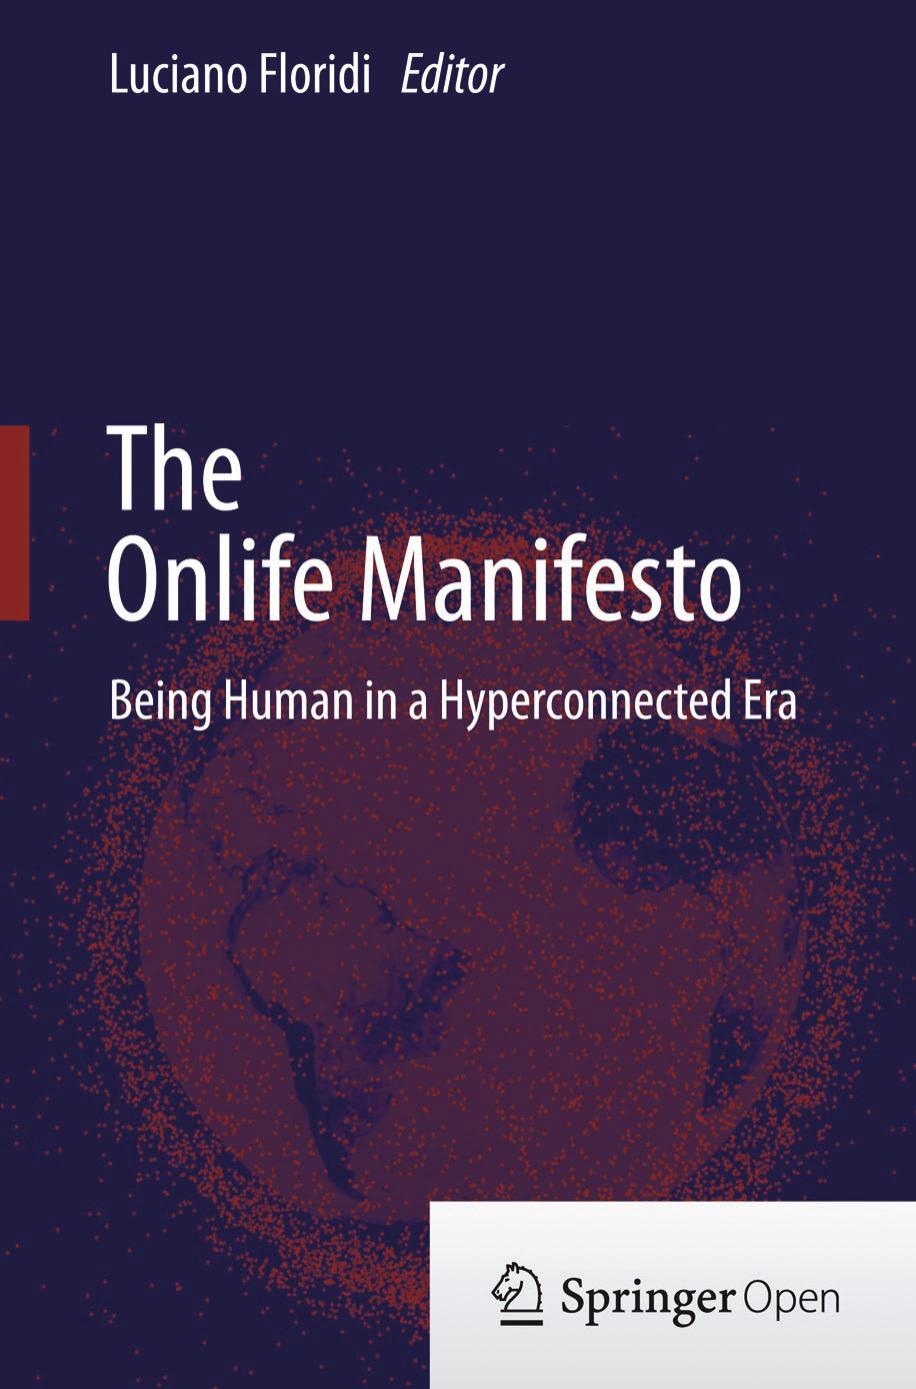 The Onlife Manifesto by Luciano Floridi